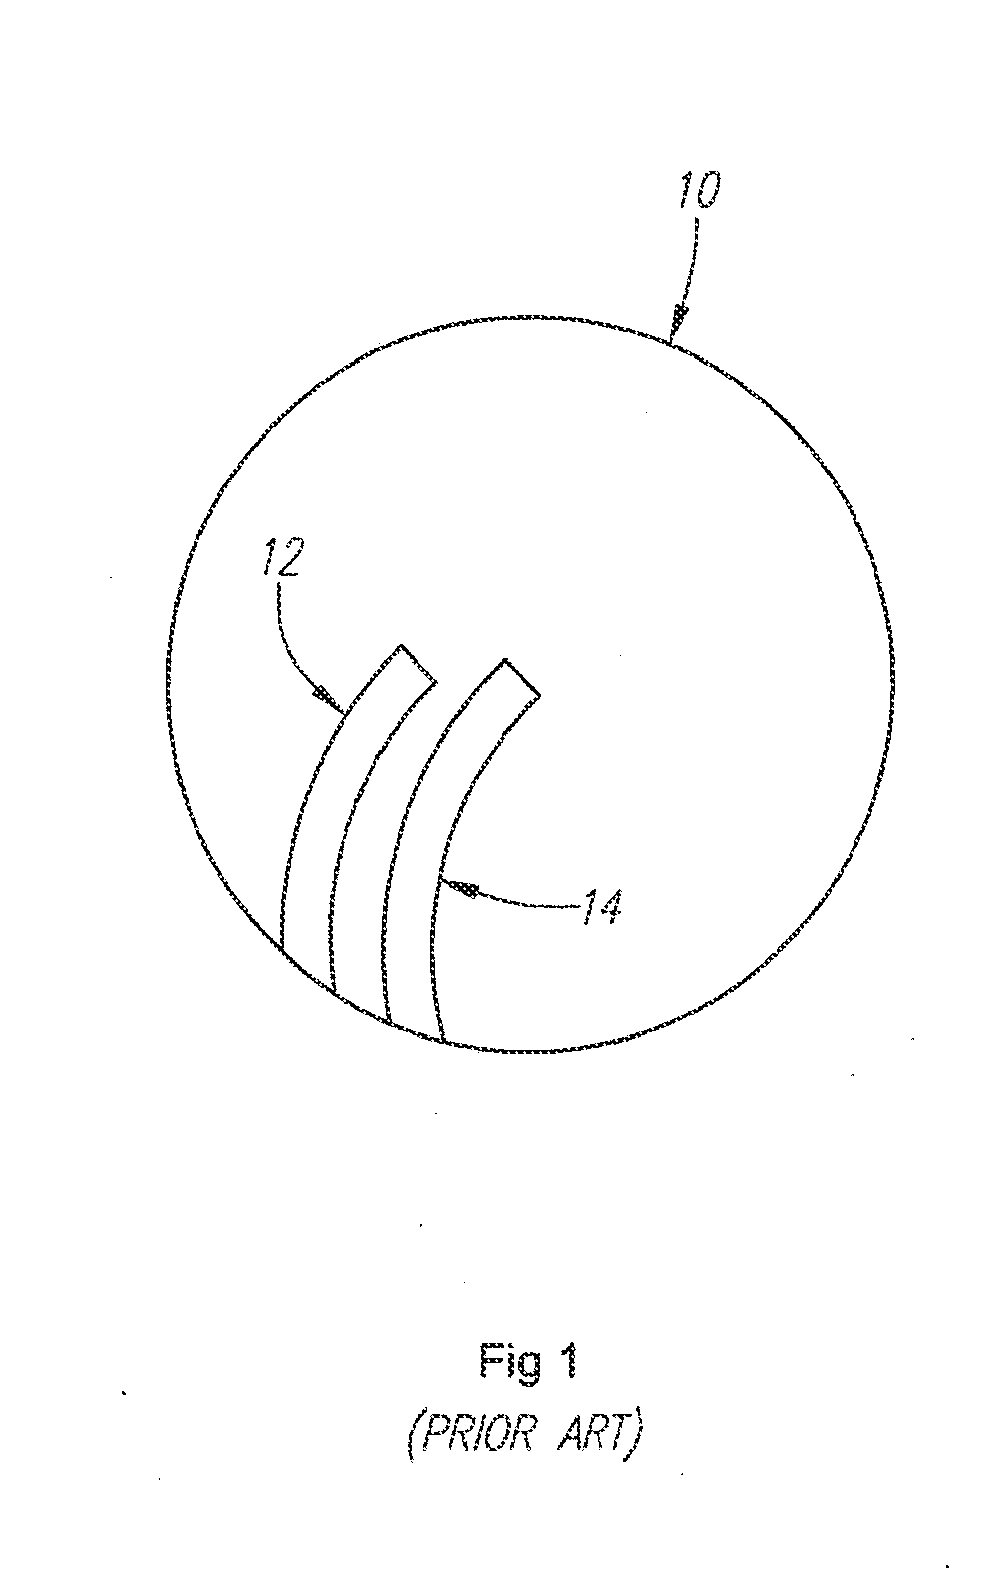 System and method for sensing shape of elongated instrument